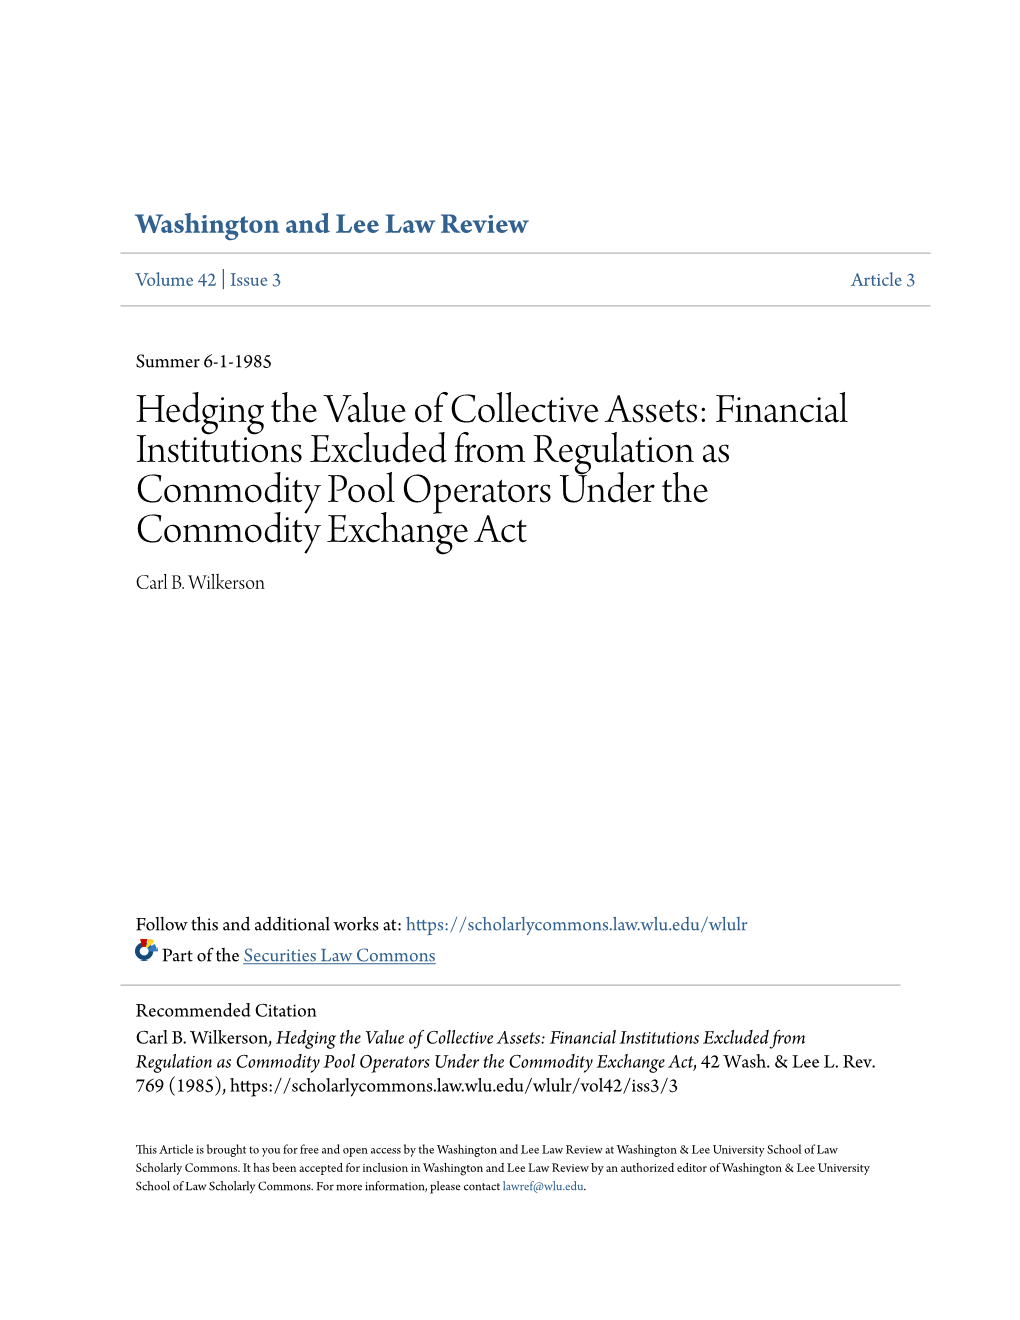 Hedging the Value of Collective Assets: Financial Institutions Excluded from Regulation As Commodity Pool Operators Under the Commodity Exchange Act Carl B